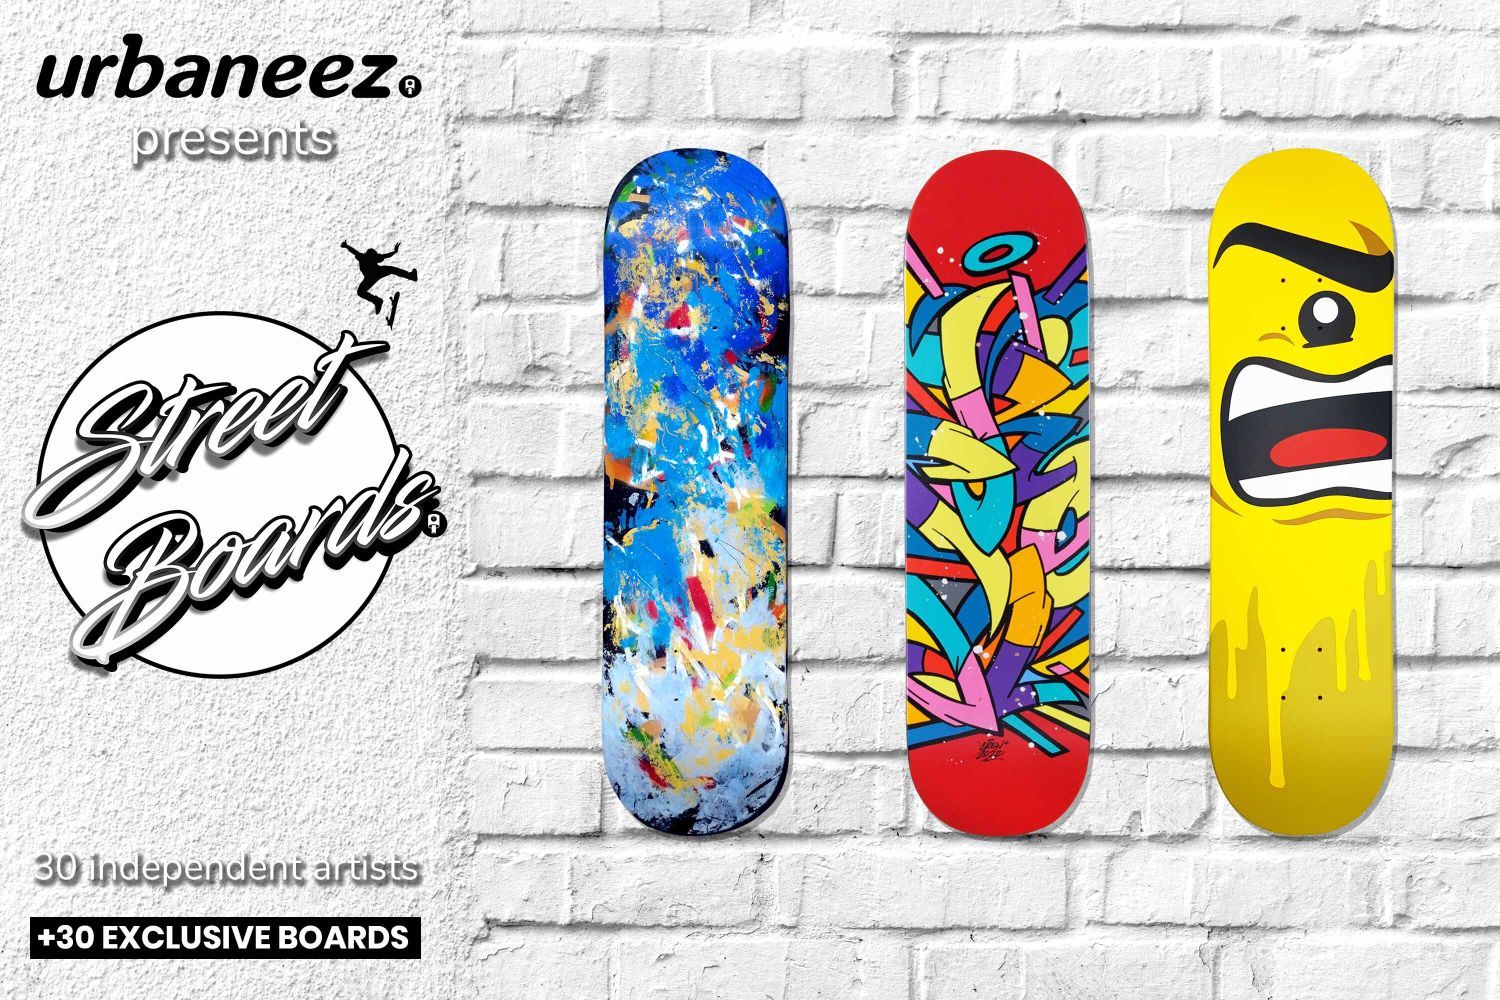 Urbaneez Street Boards Collection